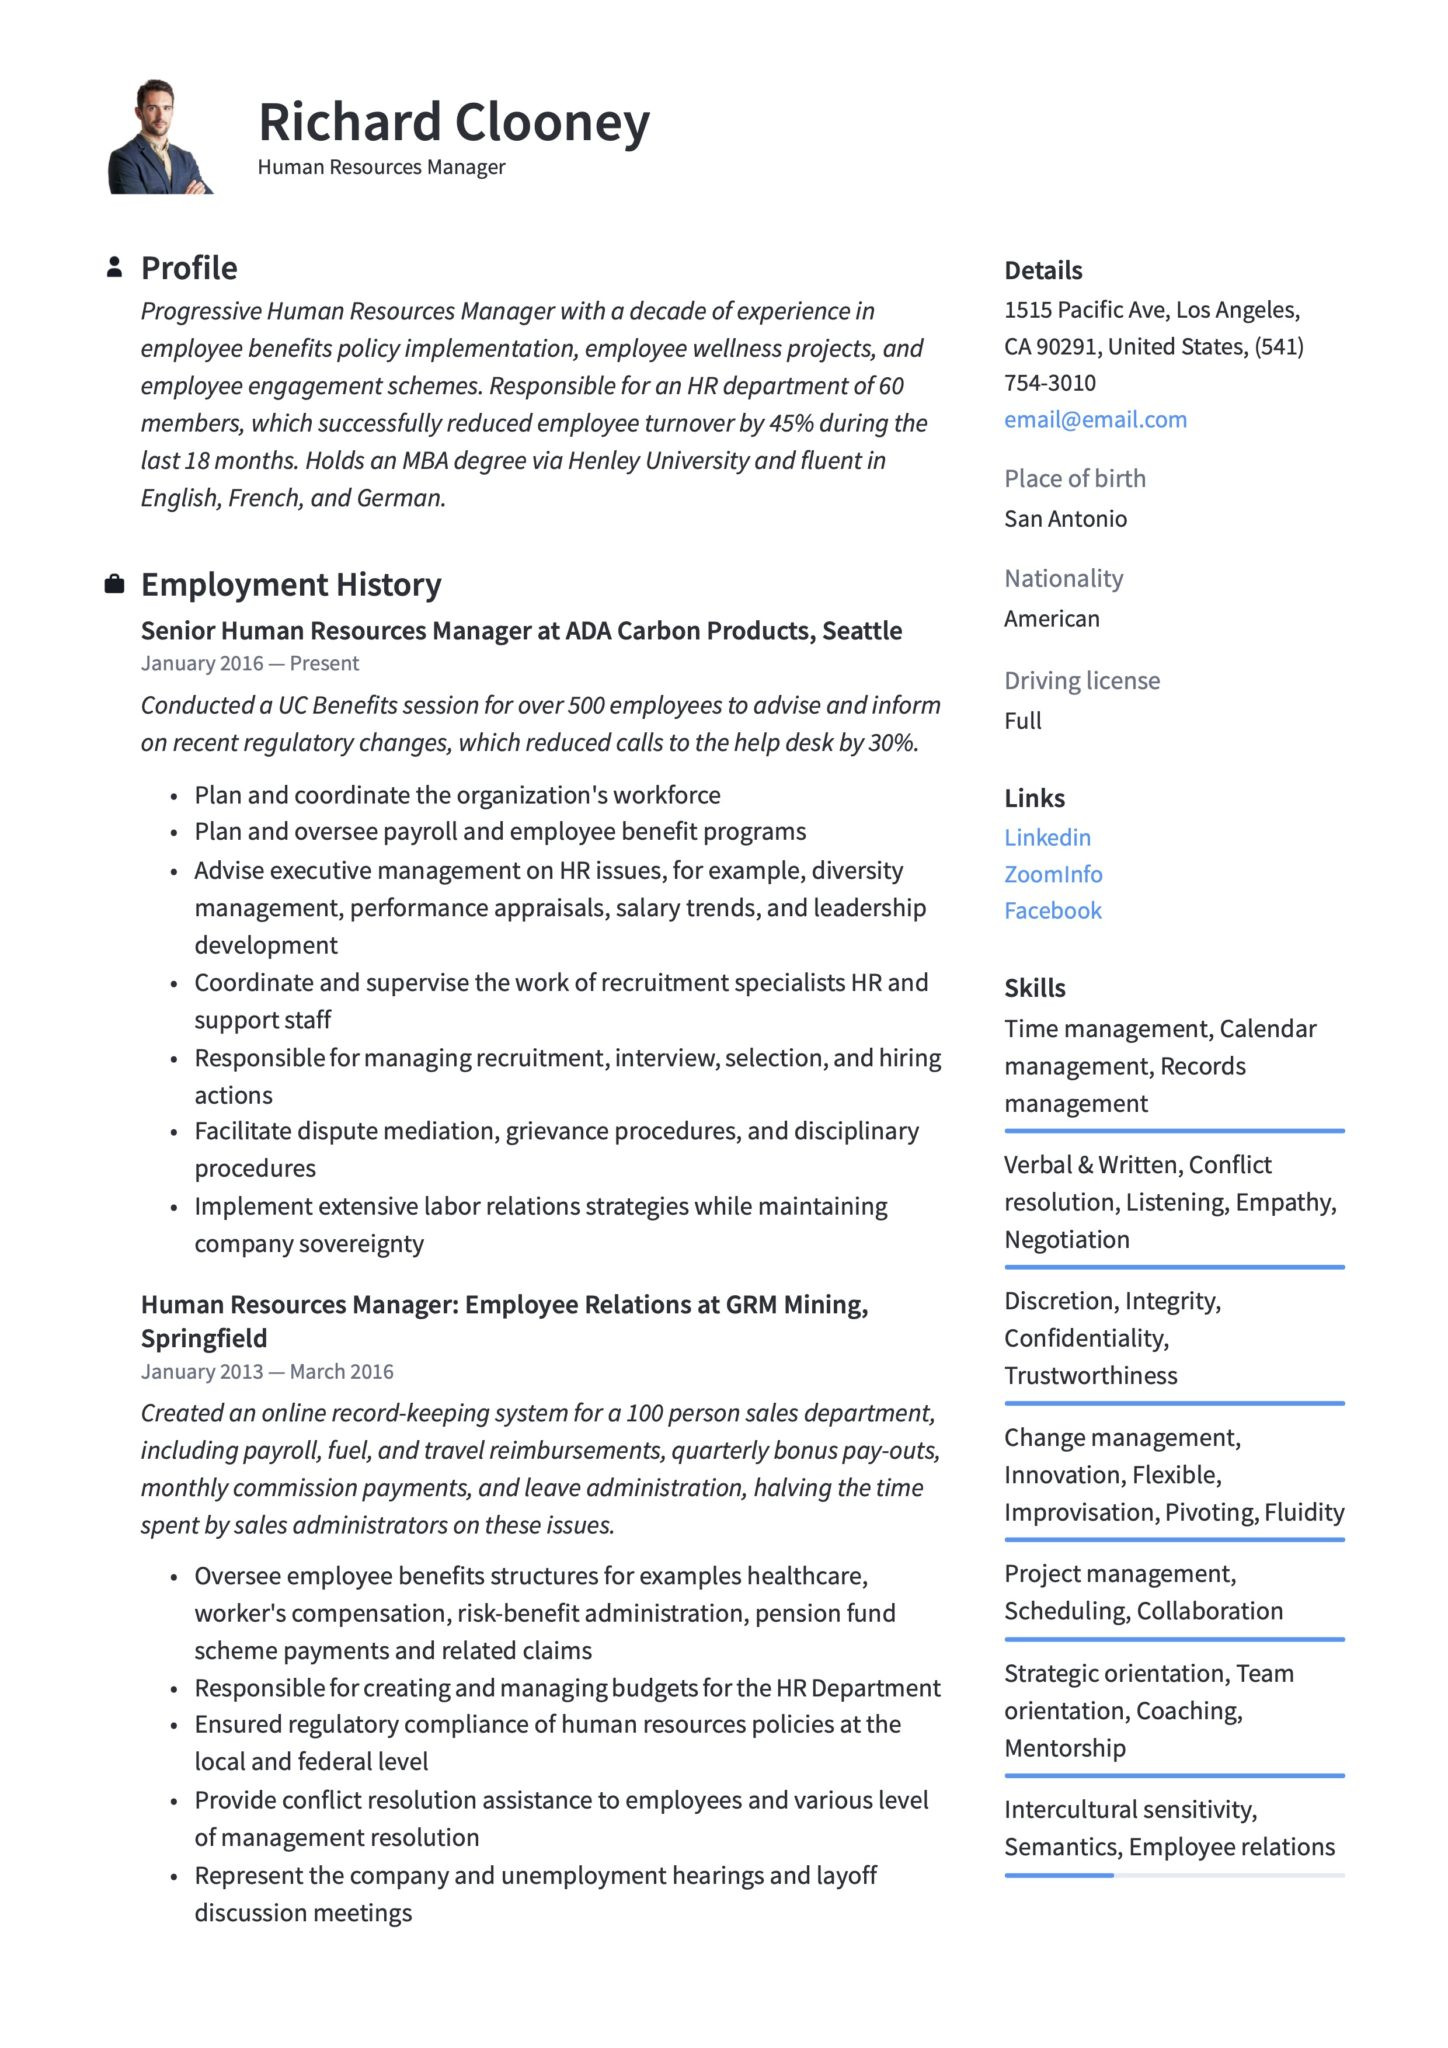 Resume Sample Human Resources Federal Contractor 17 Human Resources Manager Resumes & Guide 2020